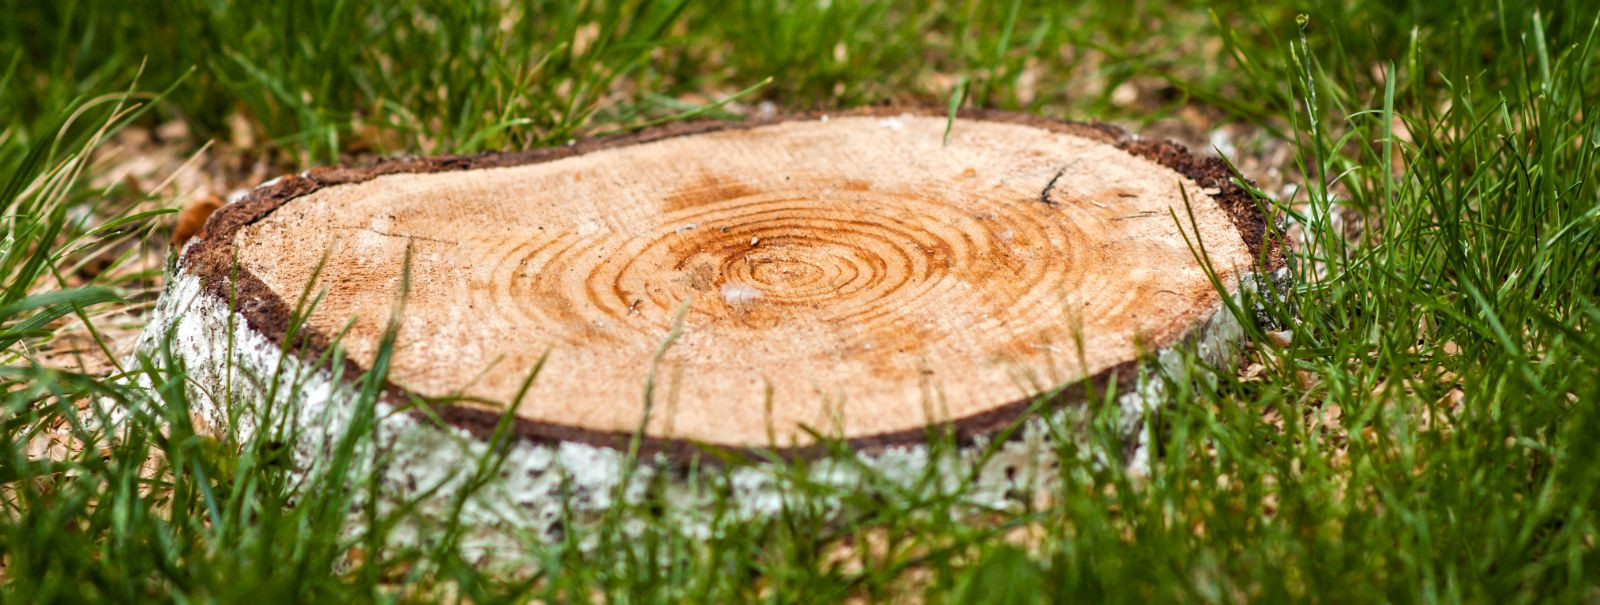 Stump grinding is a specialized process that involves the removal of tree stumps by mechanically grinding and chipping the wood into small chips. This method is